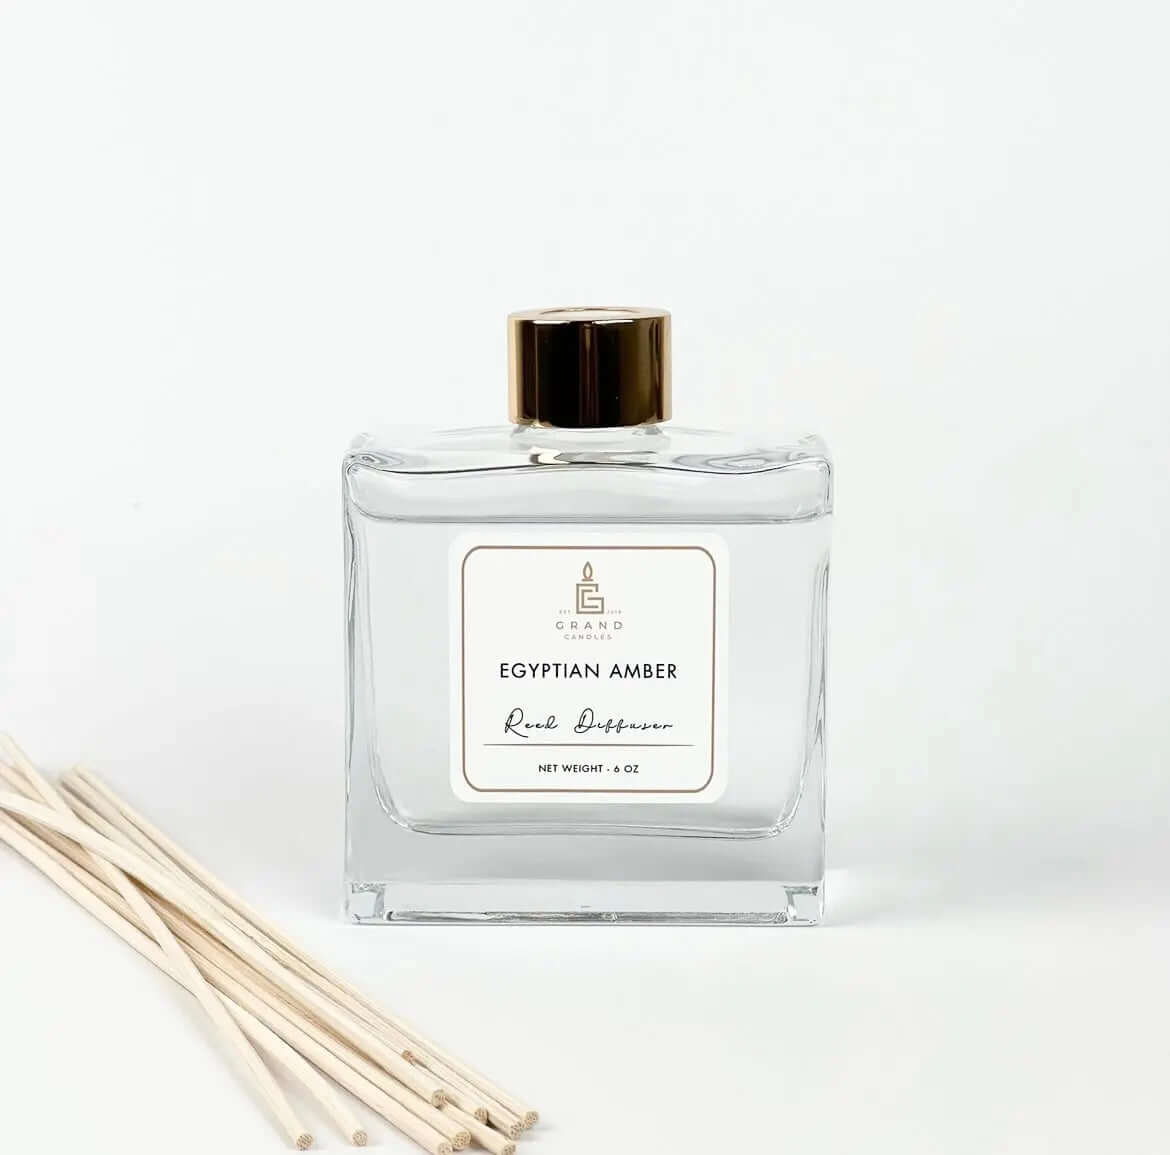 Egyptian Amber Reed Diffuser Grand Candles LLC